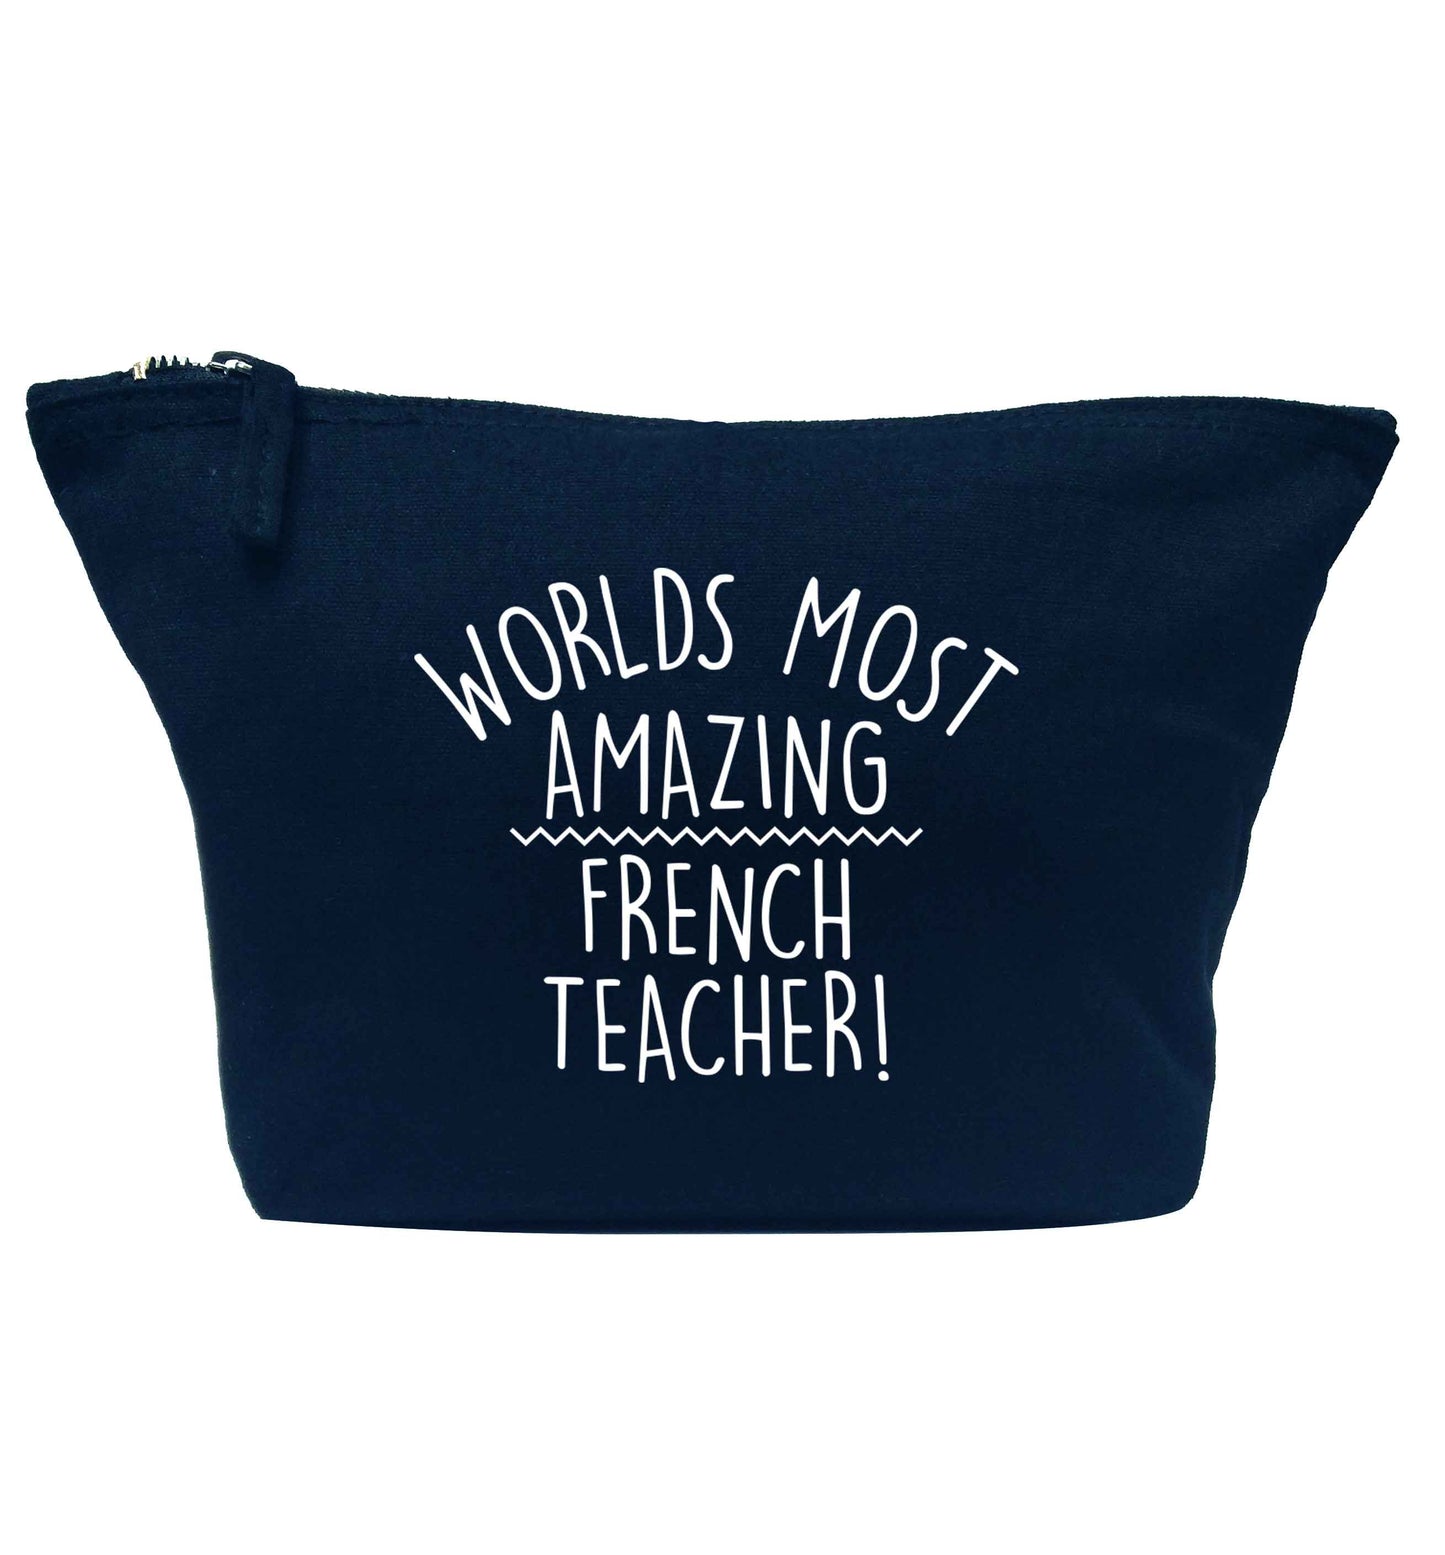 Worlds most amazing French teacher navy makeup bag